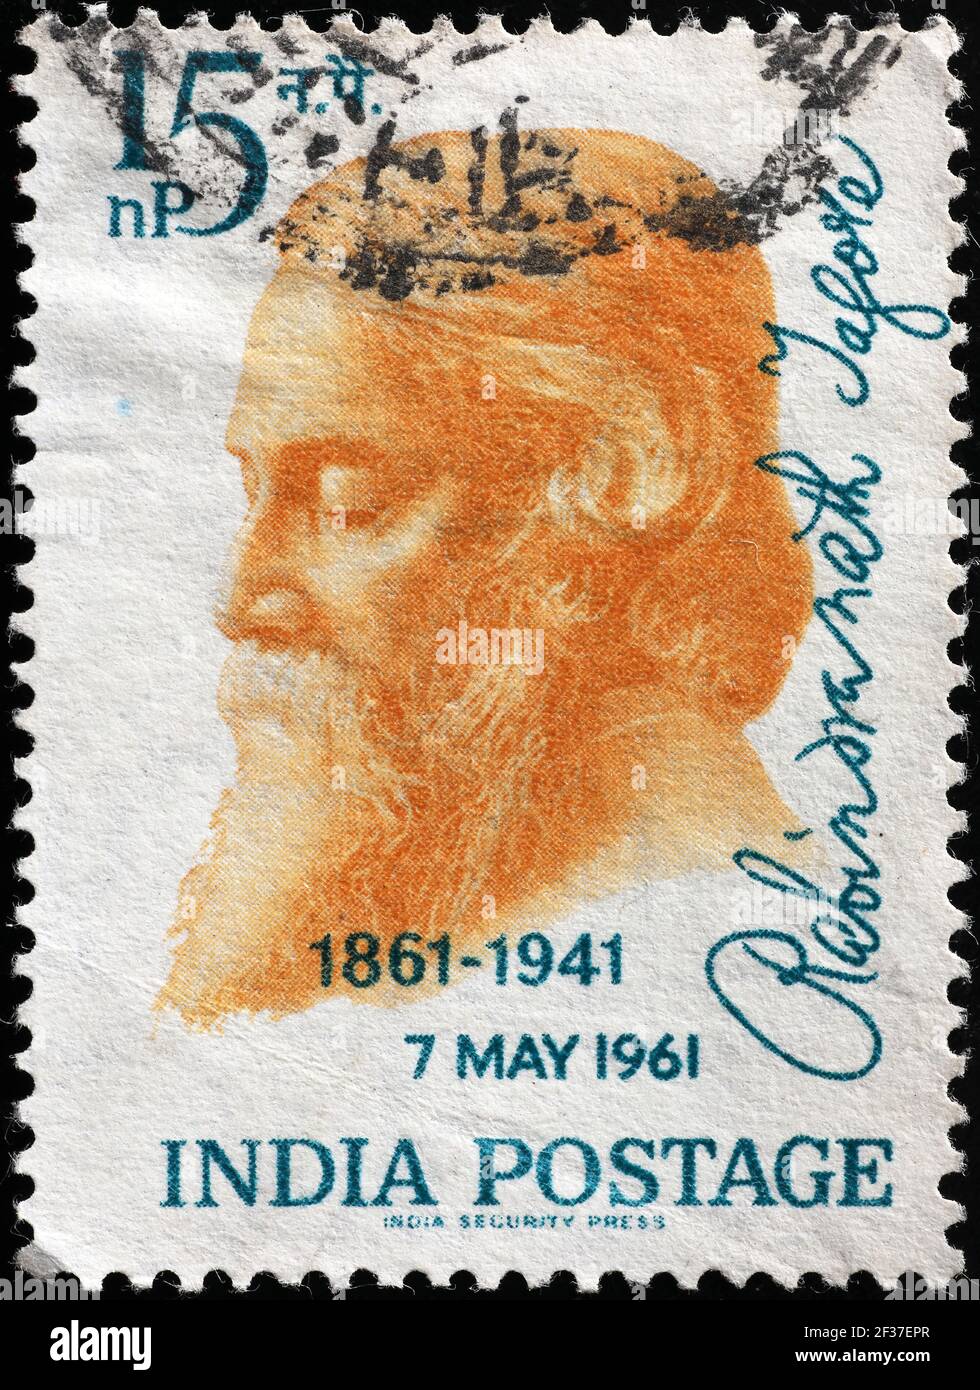 Rabindranath Tagore on indian postage stamp Stock Photo